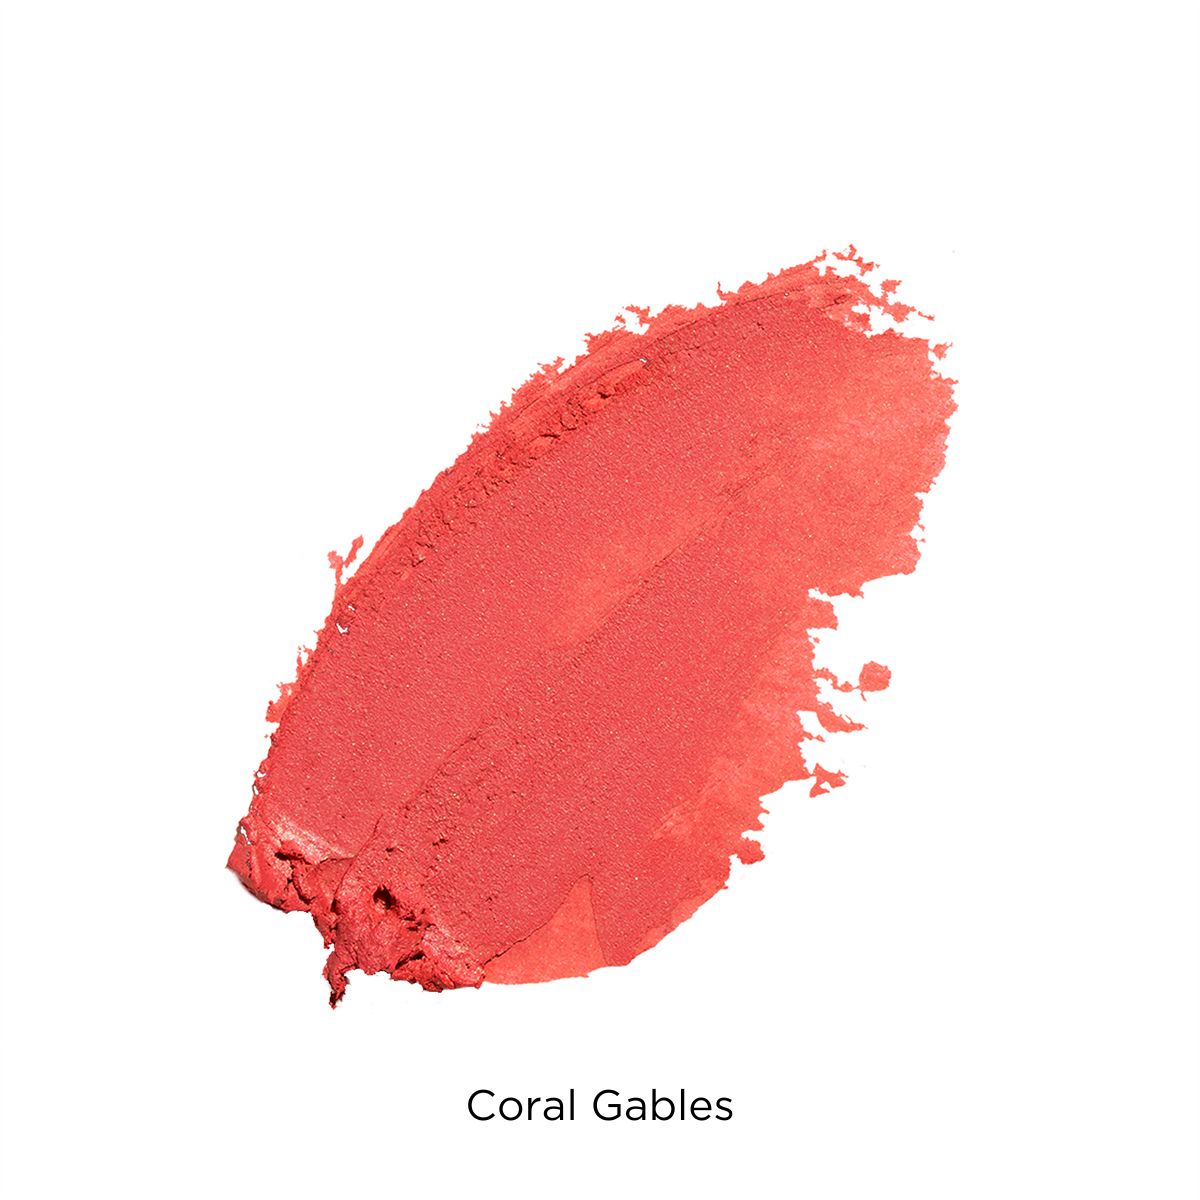 noal-beauty-coral-gables-swatch-3-in-1-color-stick-lips-eyes-cheeks